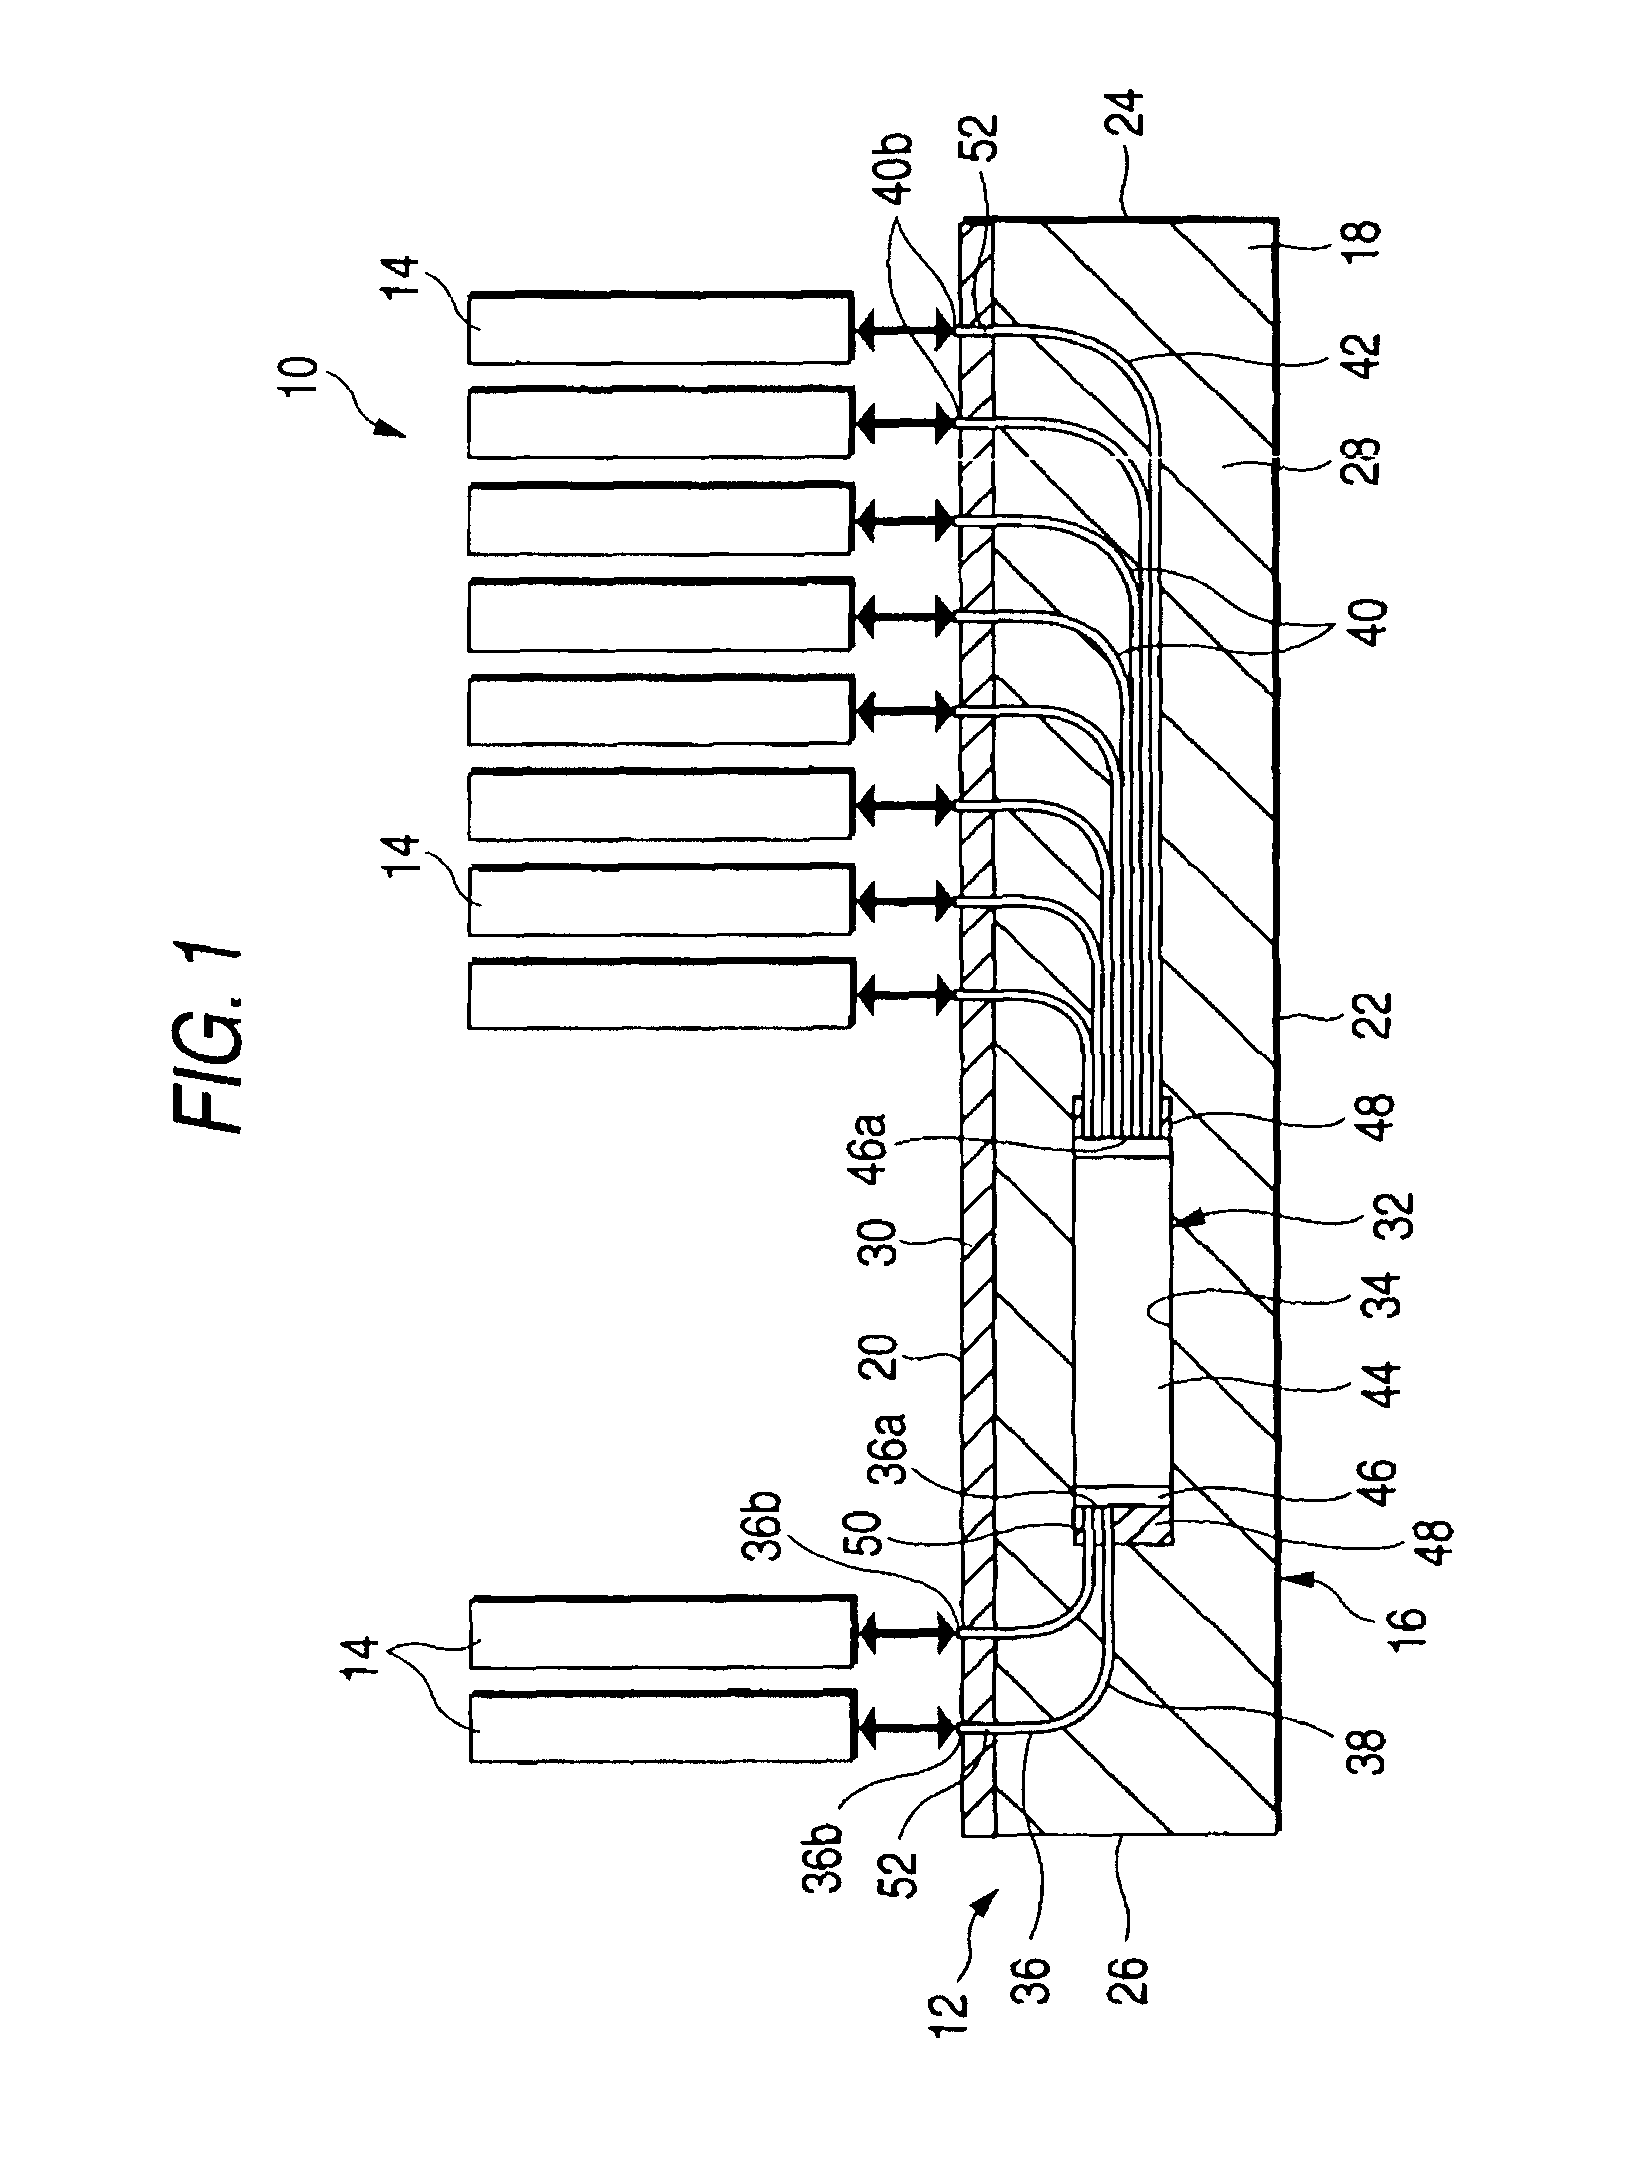 Optical wiring circuit, optical wiring circuits layered body and opto-electric wiring apparatus